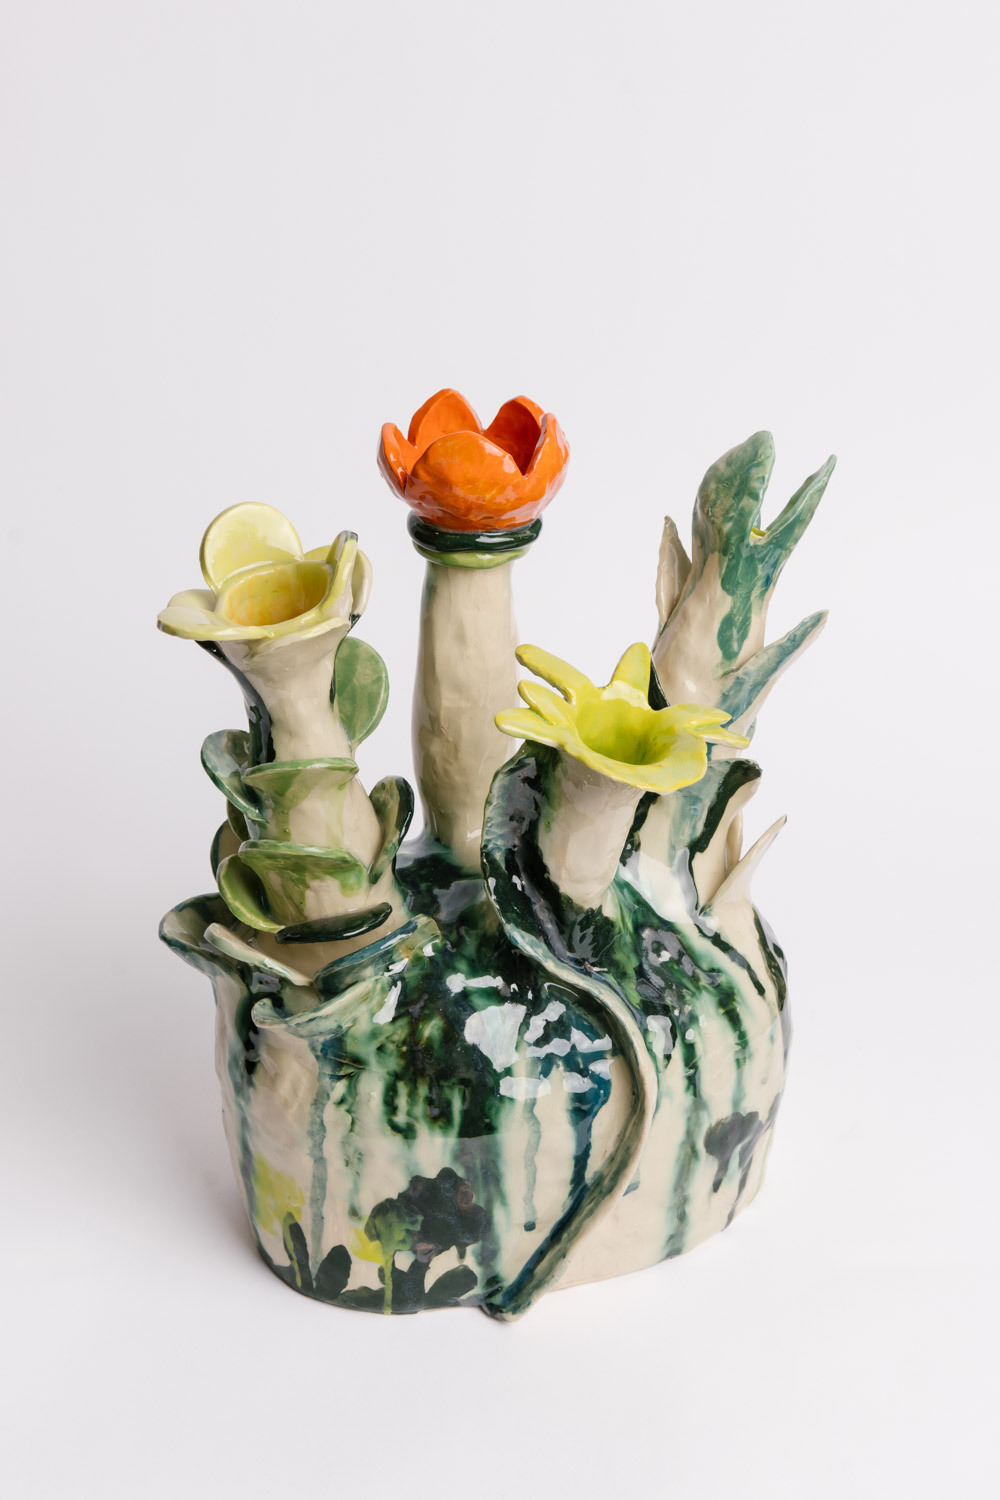 Ceramic sculptural work by Susan Buret, featuring flowers in yellow and orange, photo by Samee Lapham